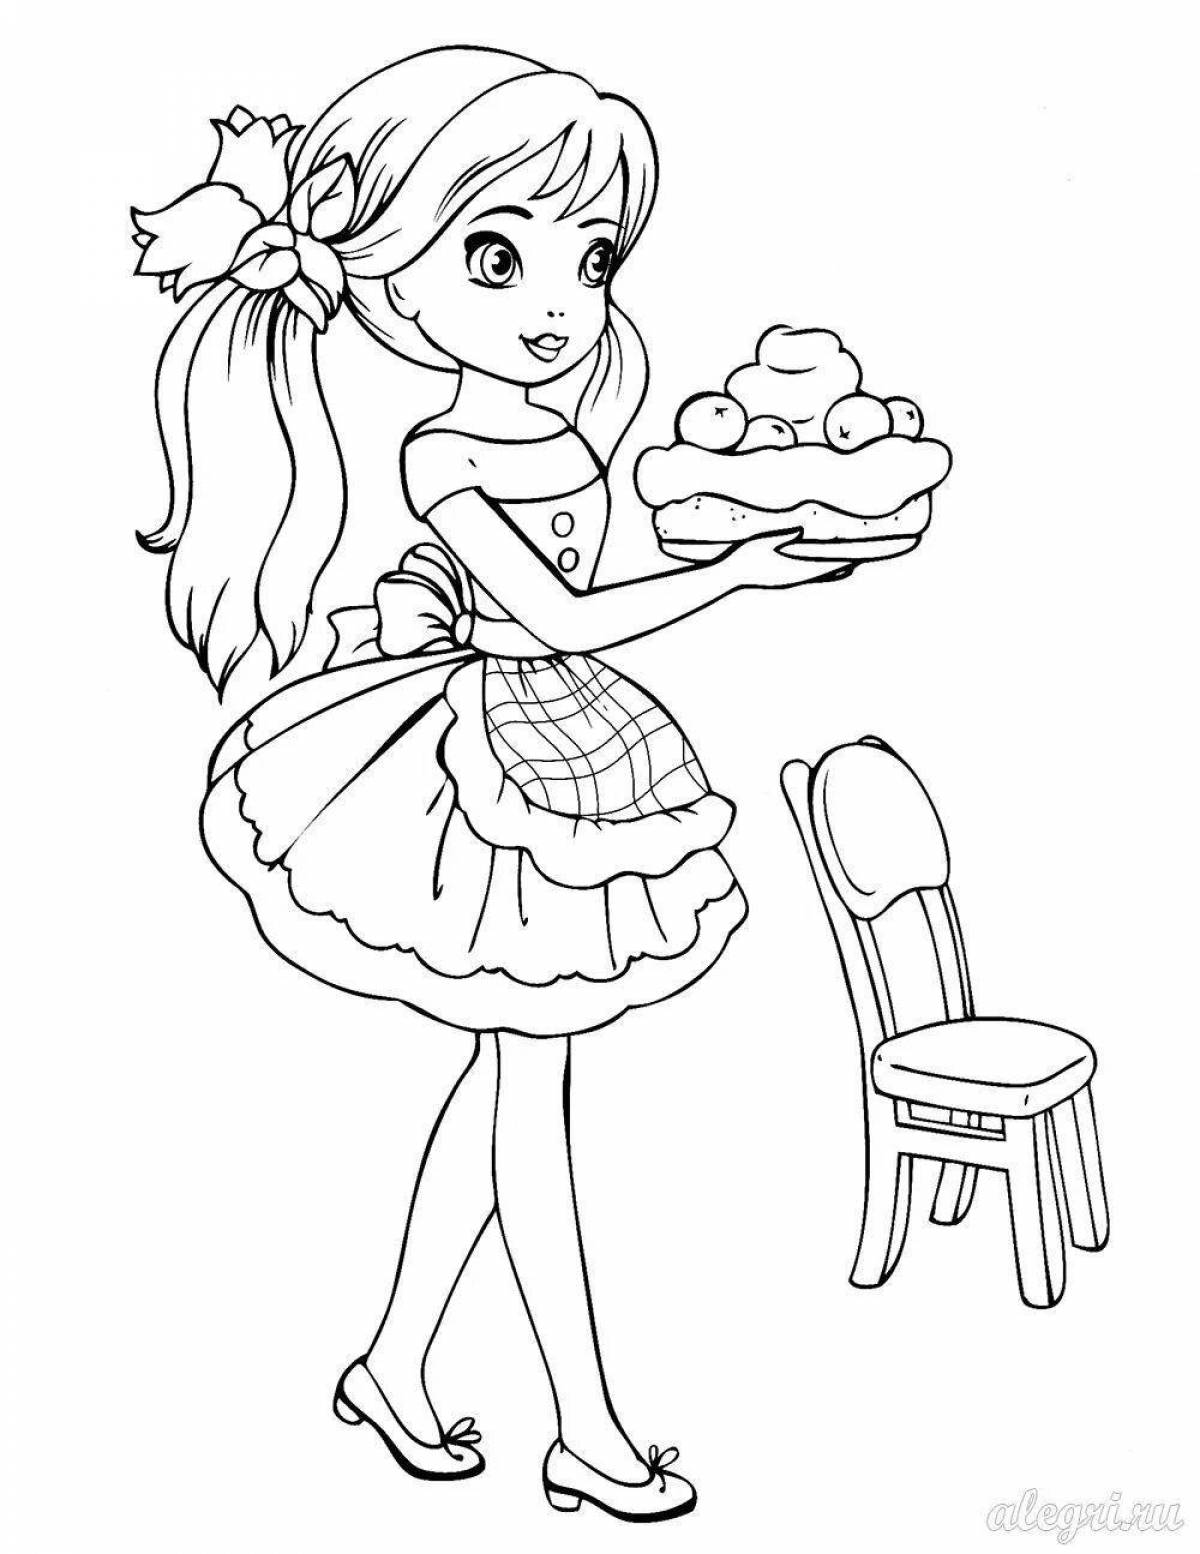 Amazing coloring page 7 for girls